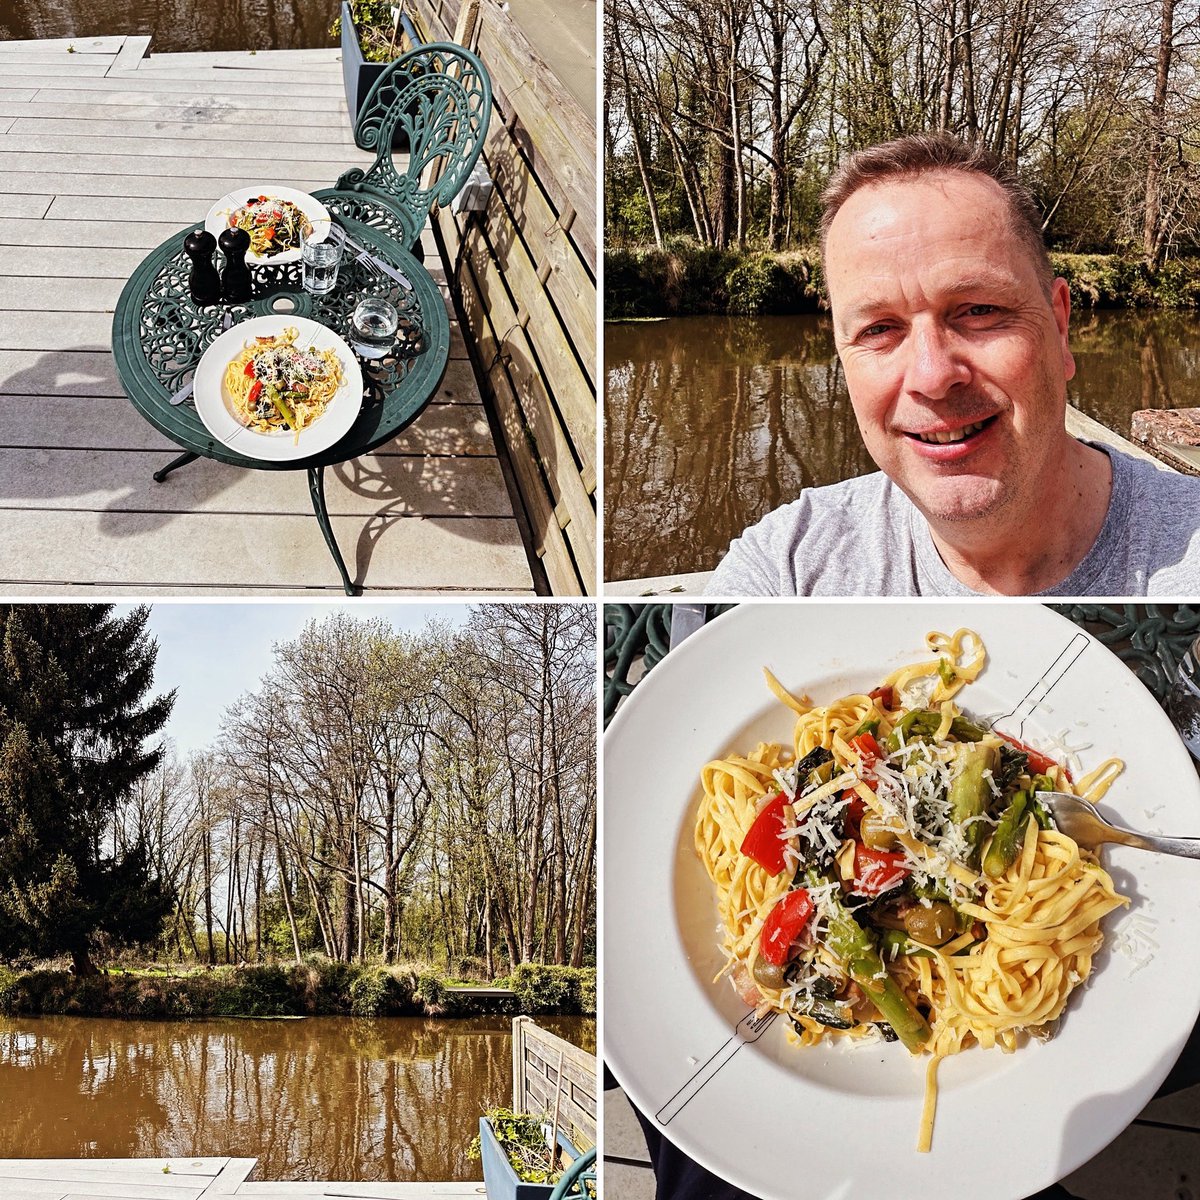 The first really beautiful day since we have been here so, as we are both working from home today, had to be lunch in the garden, by the river. So pleased we moved here #lunch #garden #pasta #river #selfie #sun